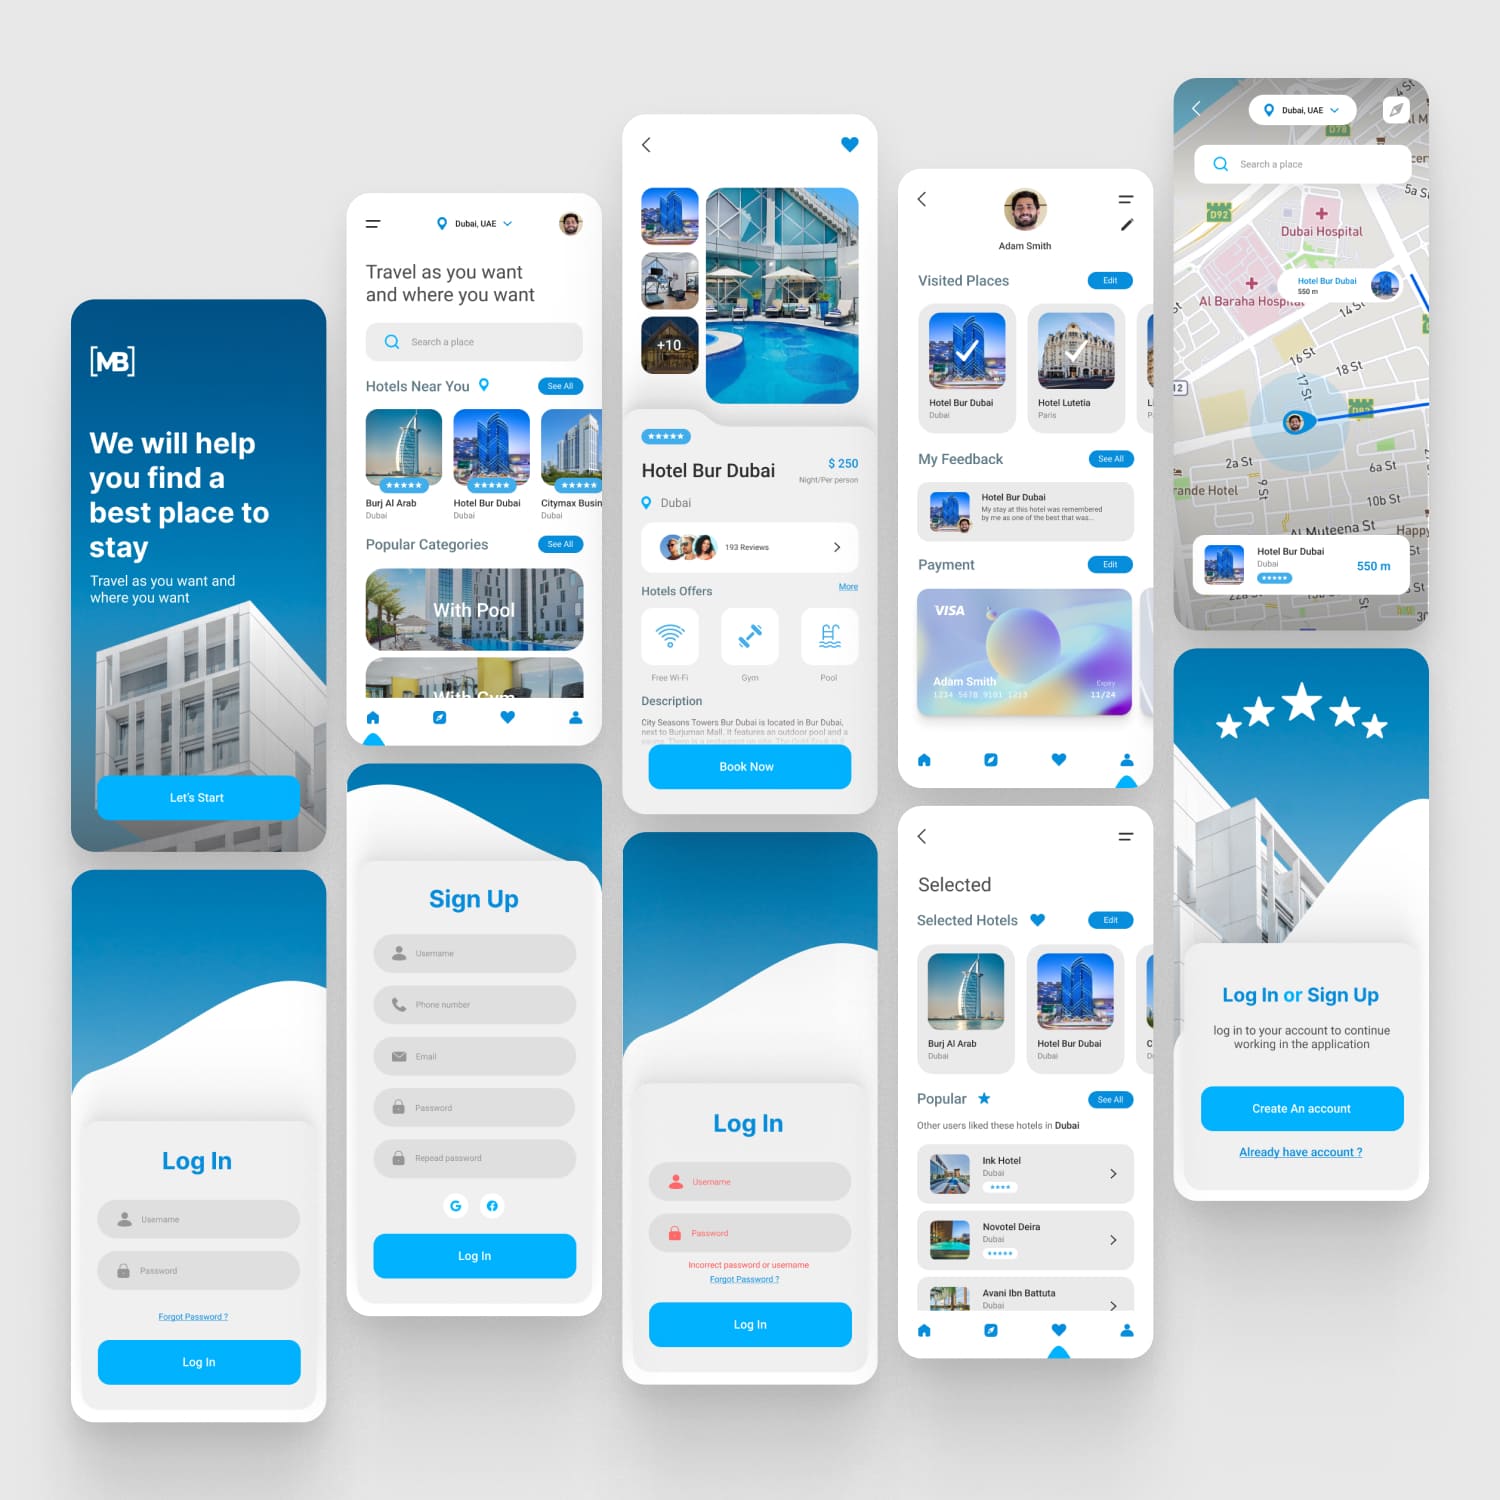 Hotel Booking App UI Kit cover.